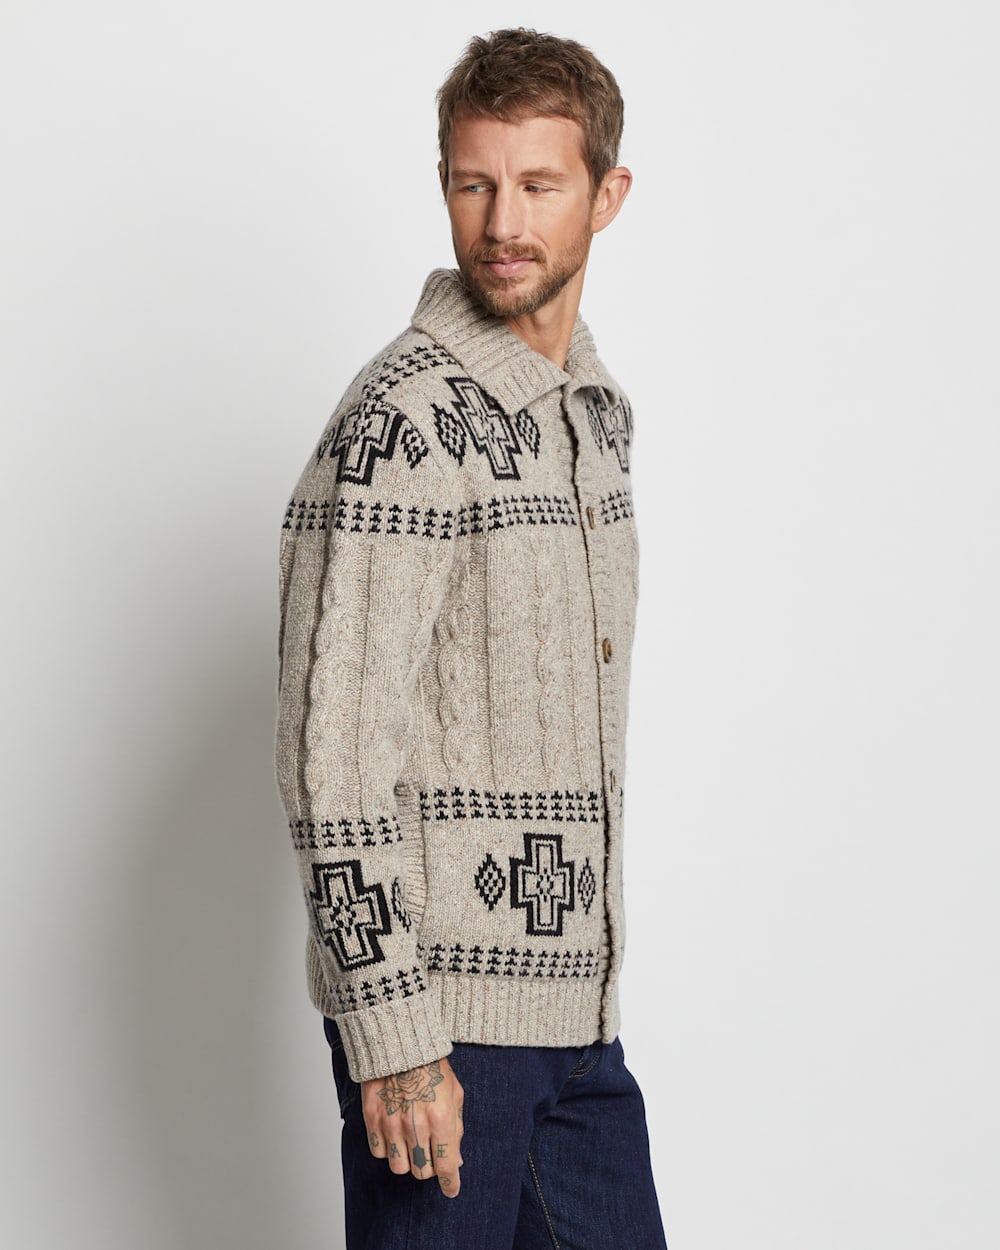 ALTERNATE VIEW OF MEN'S CABLE CROSS LAMBSWOOL CARDIGAN IN NATURAL DONEGAL image number 5